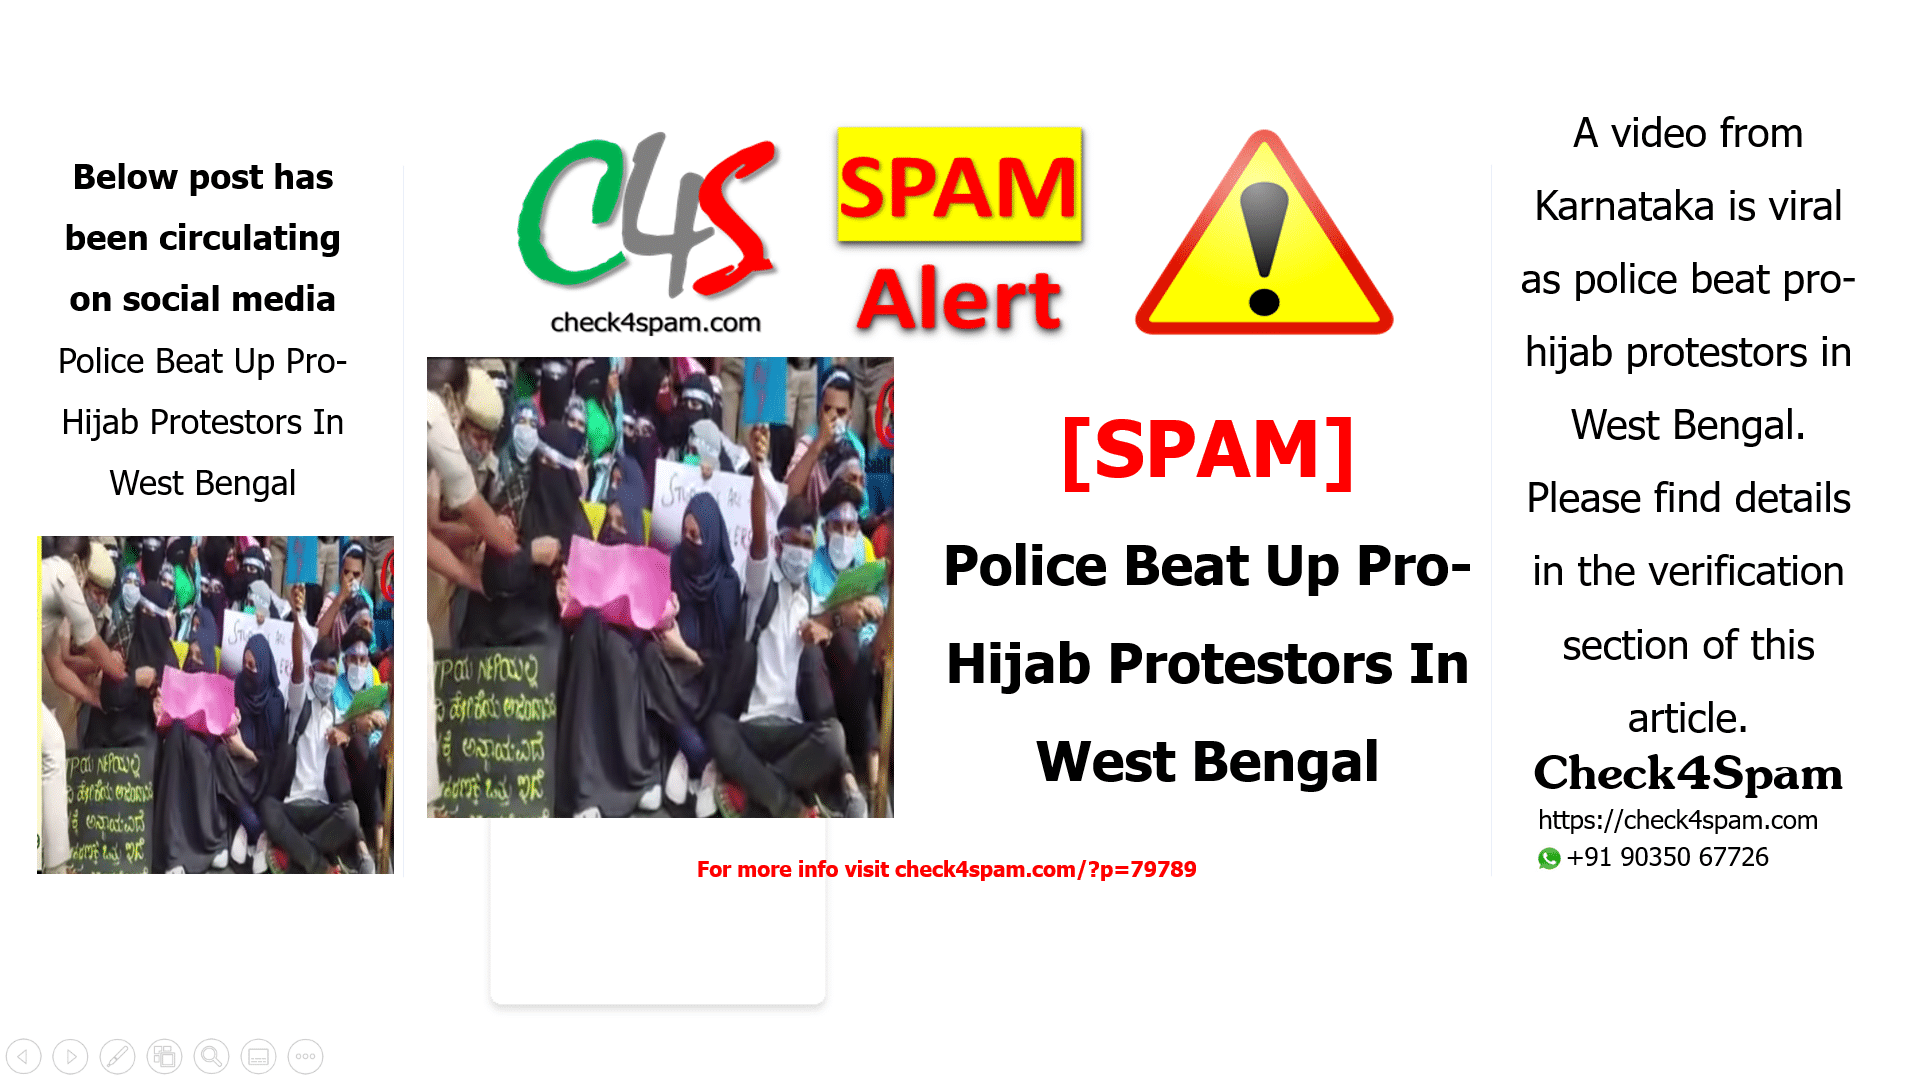 Police Beat Up Pro-Hijab Protestors In West Bengal